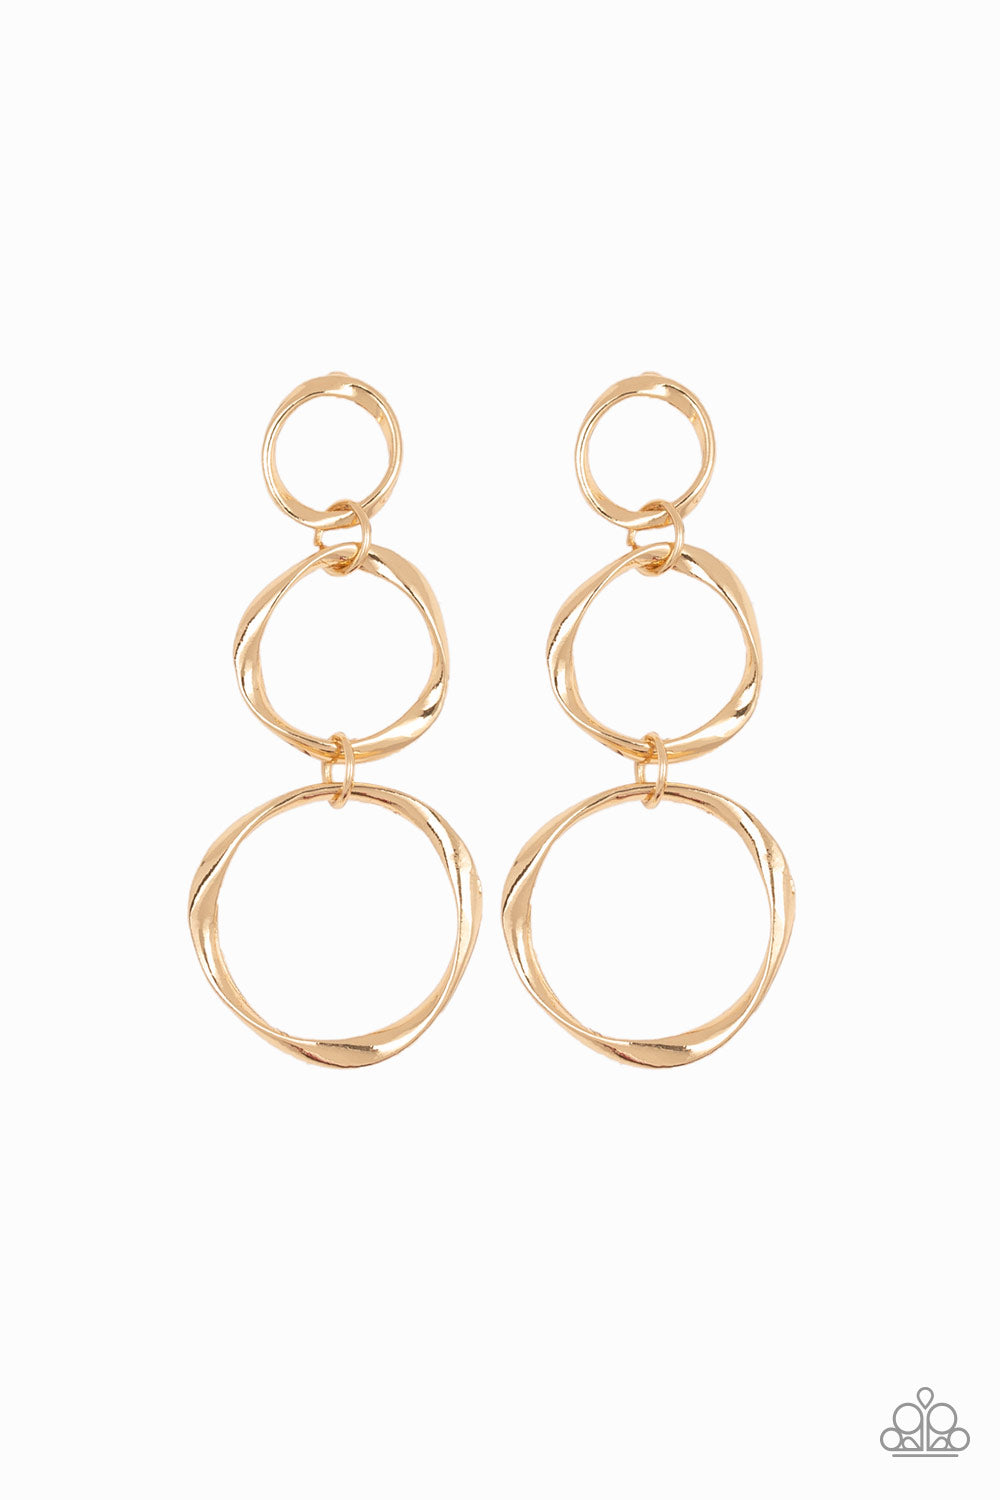 Three Ring Radiance - gold - Paparazzi earrings